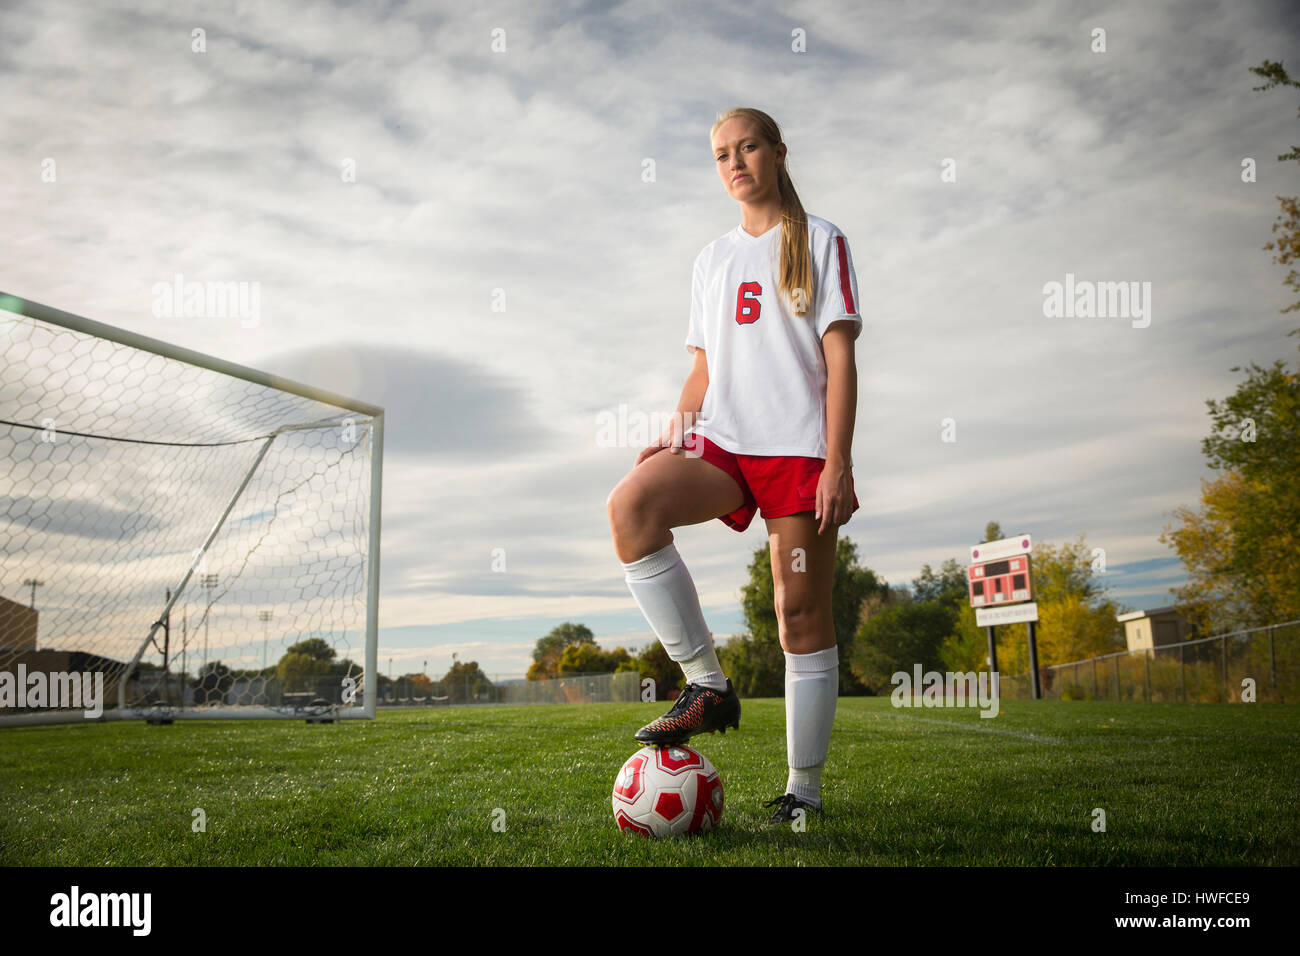 Low angle portrait of athlete standing with soccer ball on field under cloudy sky Stock Photo